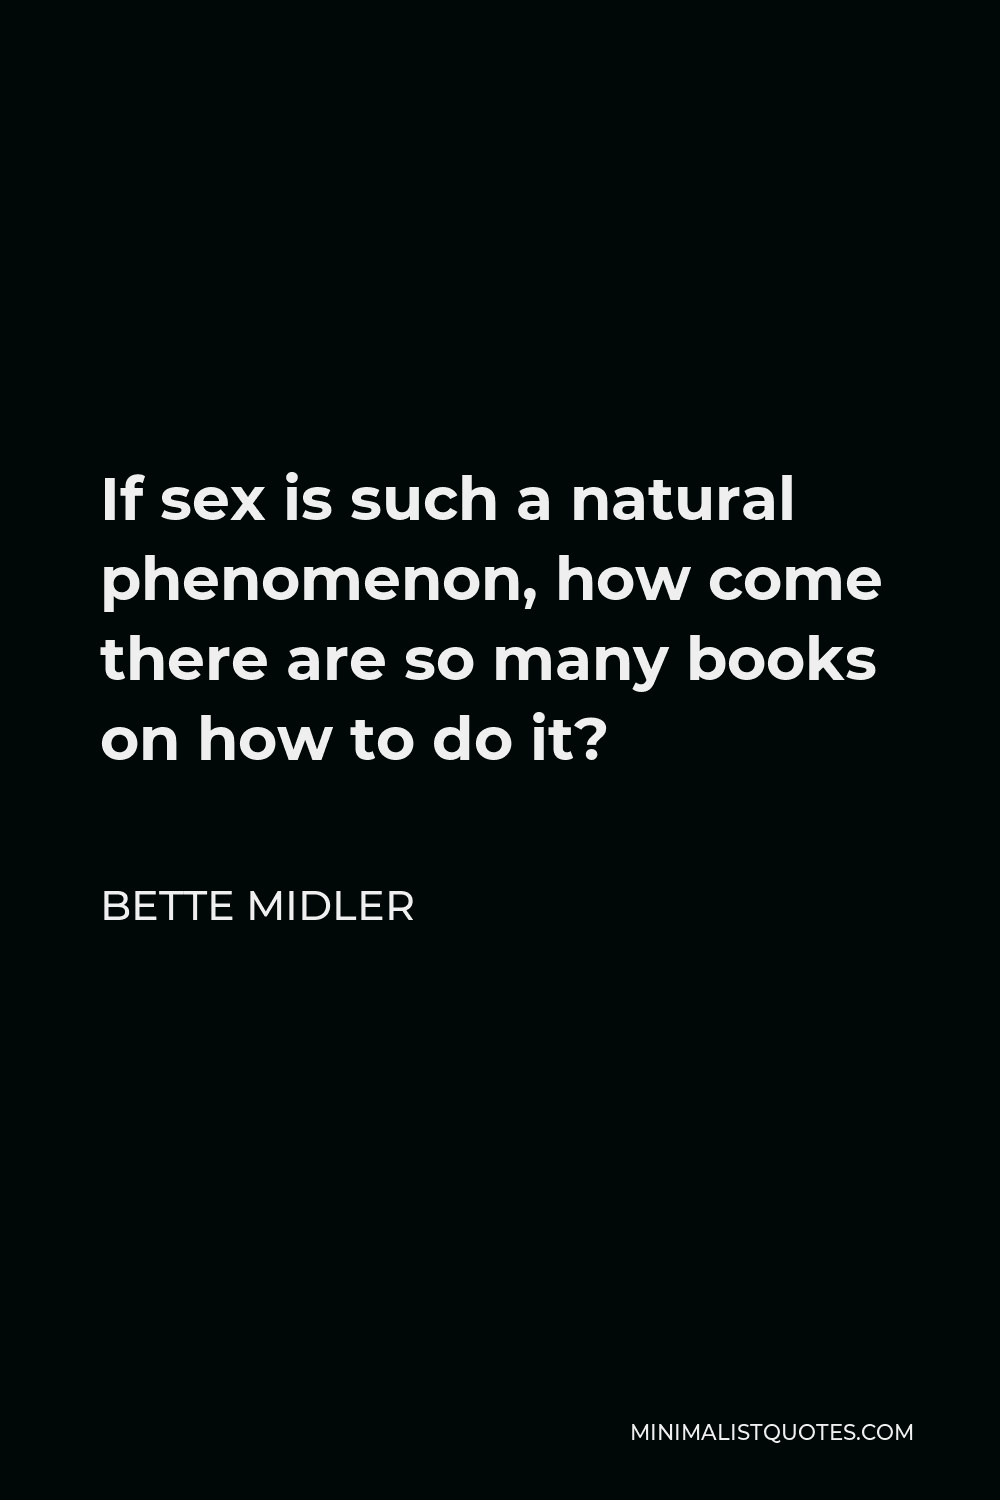 Bette Midler Quote - If sex is such a natural phenomenon, how come there are so many books on how to do it?